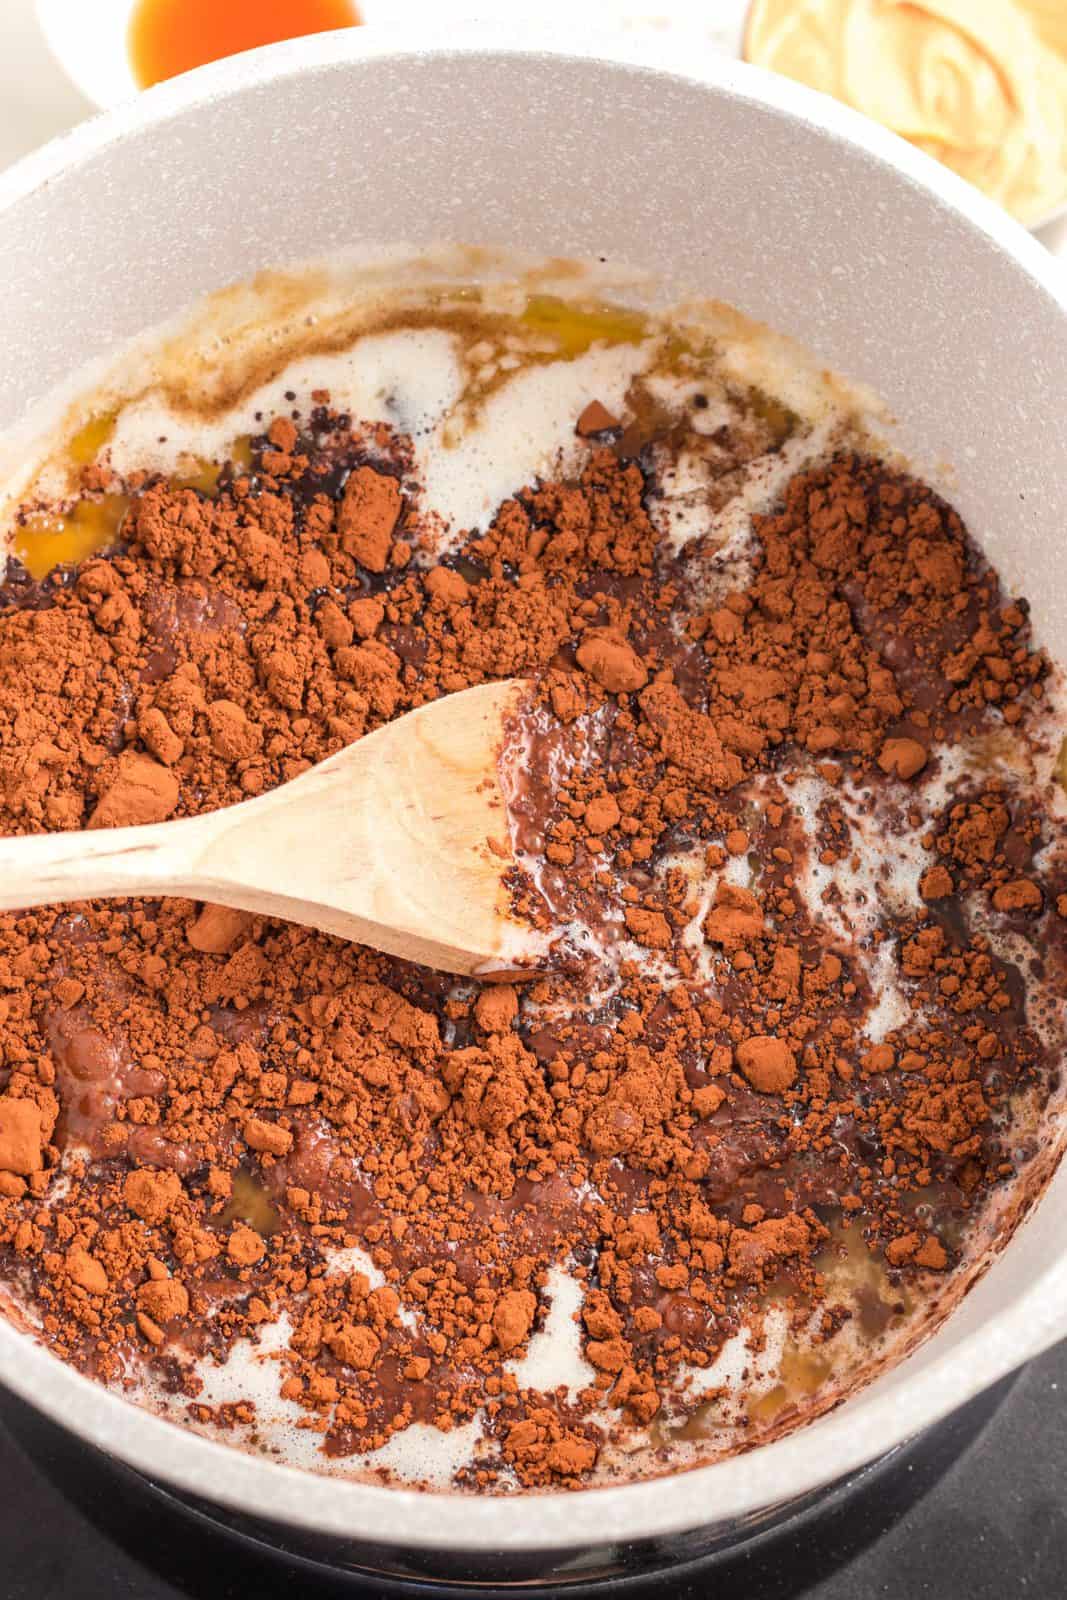 Cocoa, milk, and vanilla extract added to the brown sugar and butter mixture in pan.